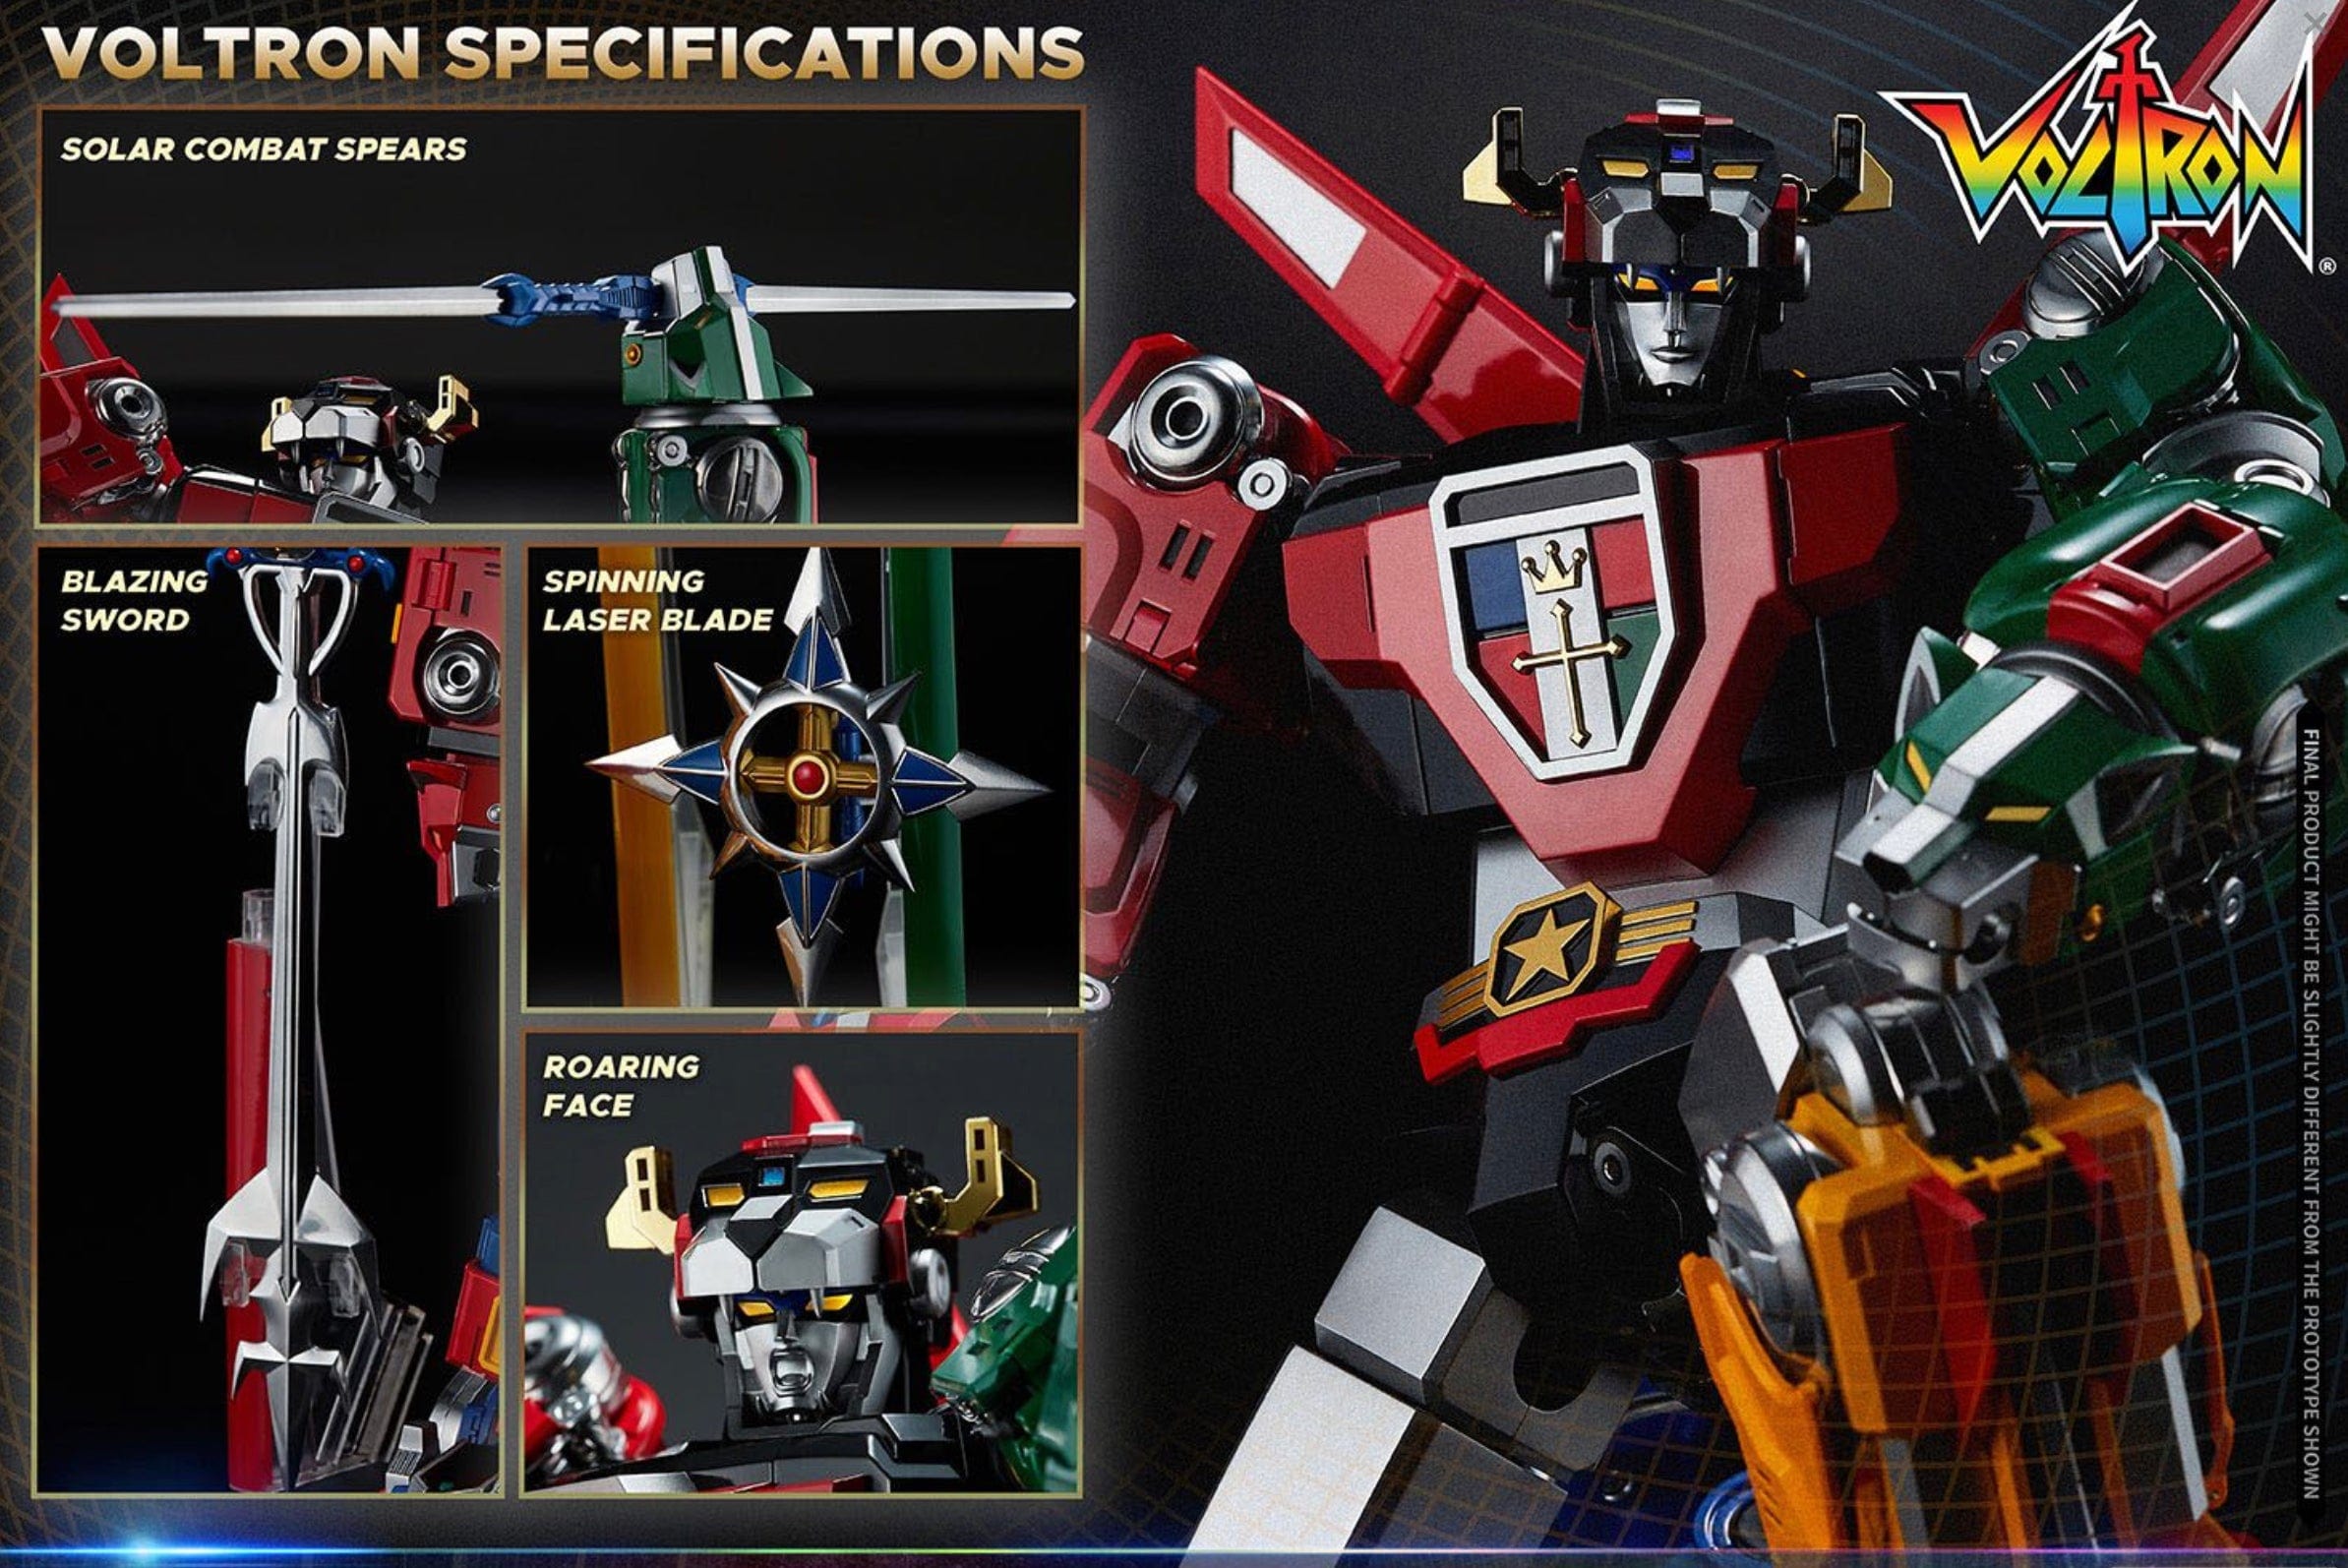 VOLTRON SPECIFICATIONS